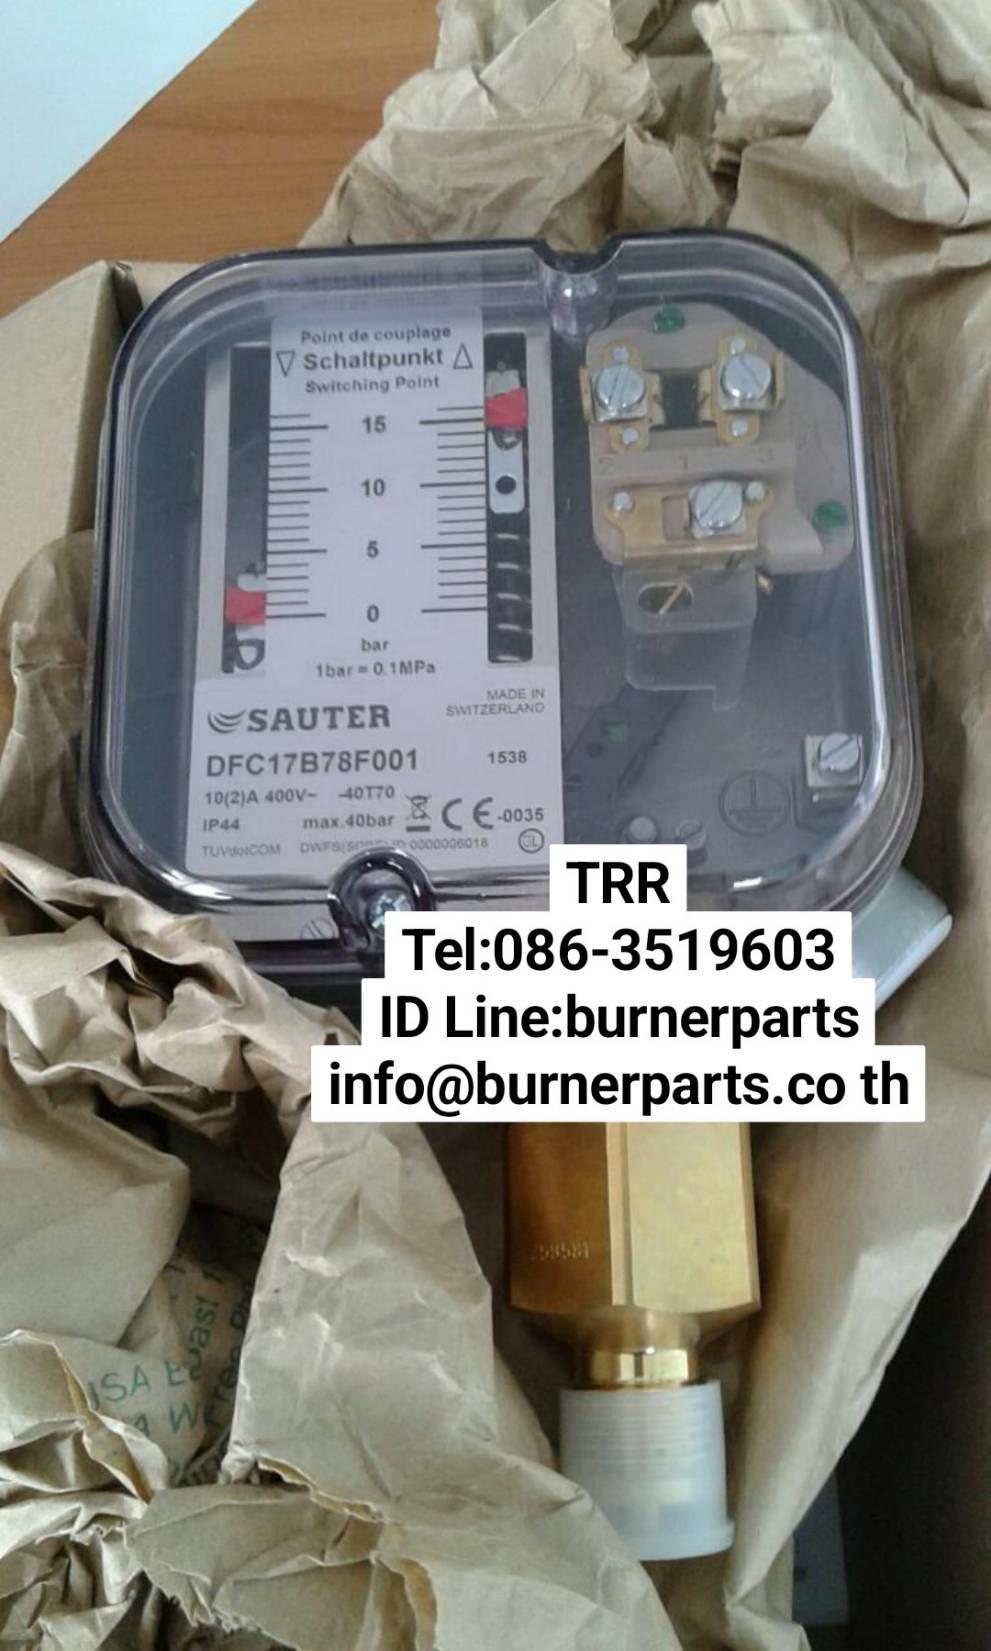 SAUTER DFC17B78F001,SAUTER DFC17B78F001,SAUTER DFC17B78F001,Instruments and Controls/Switches